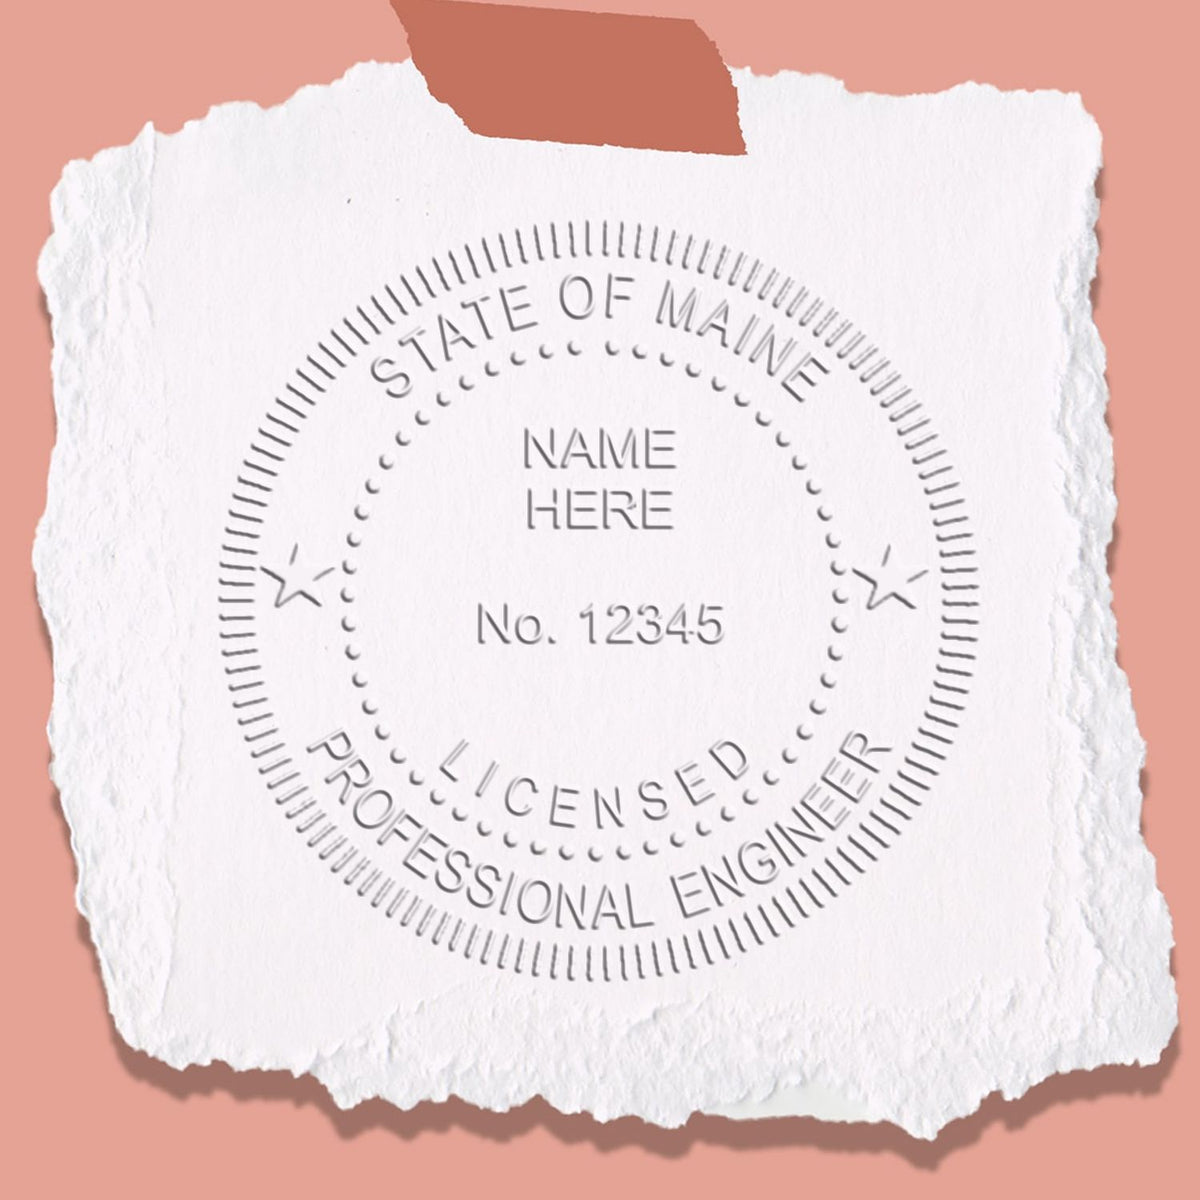 A photograph of the Soft Maine Professional Engineer Seal stamp impression reveals a vivid, professional image of the on paper.